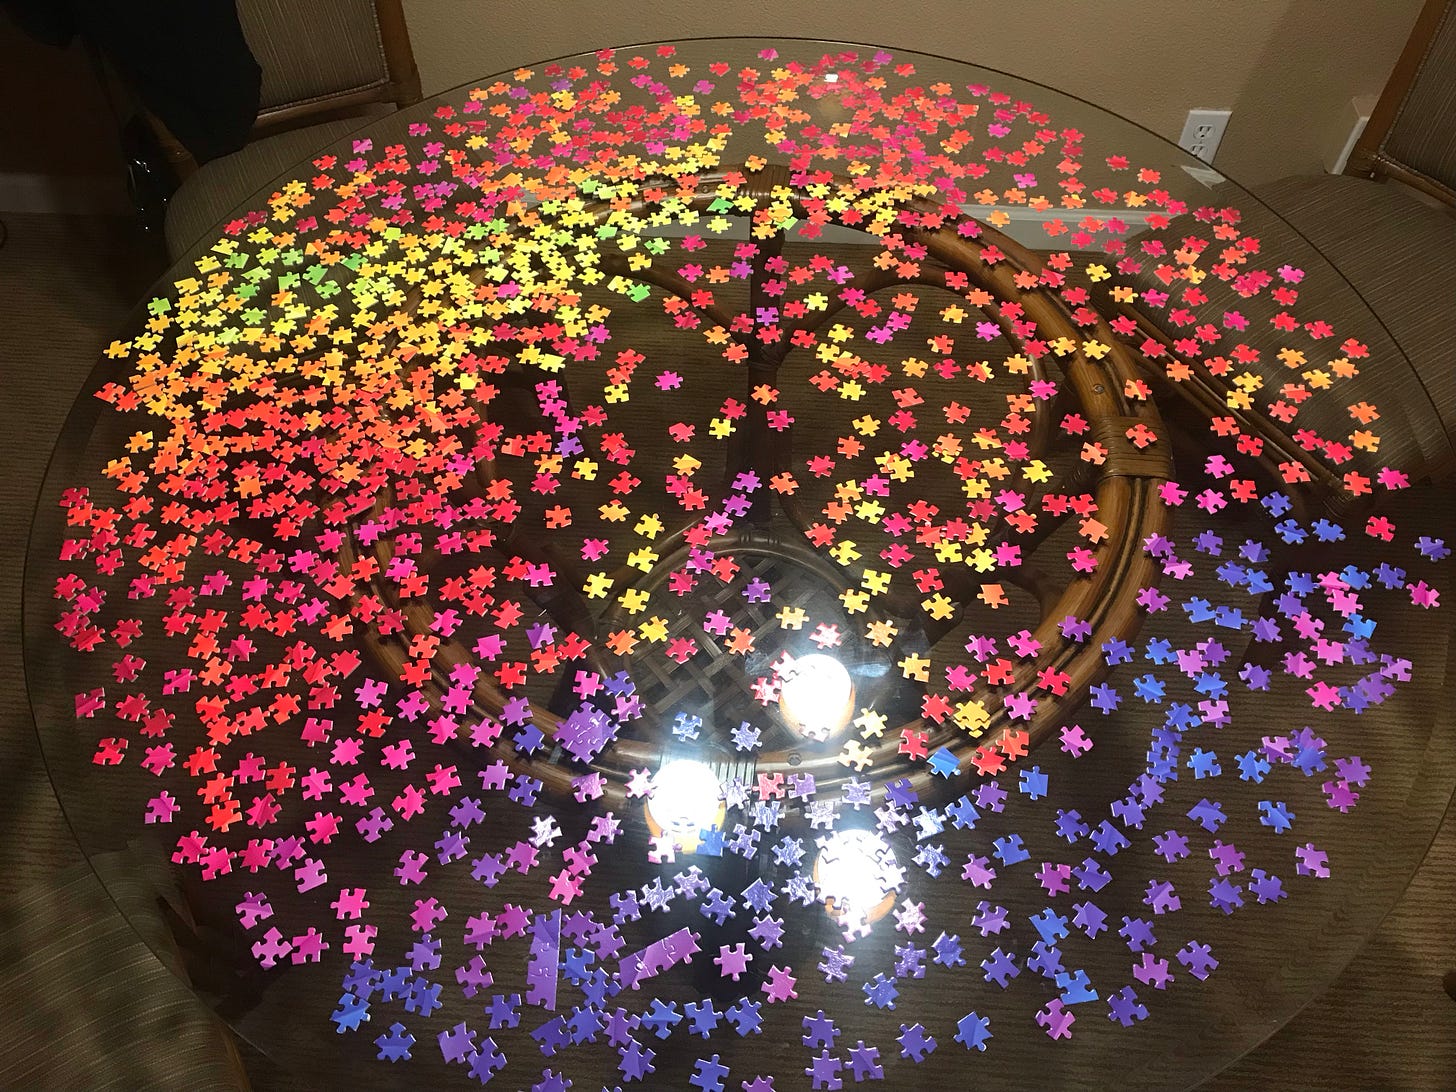 Yellow, red, pink, purple and blue puzzle pieces on a glass table